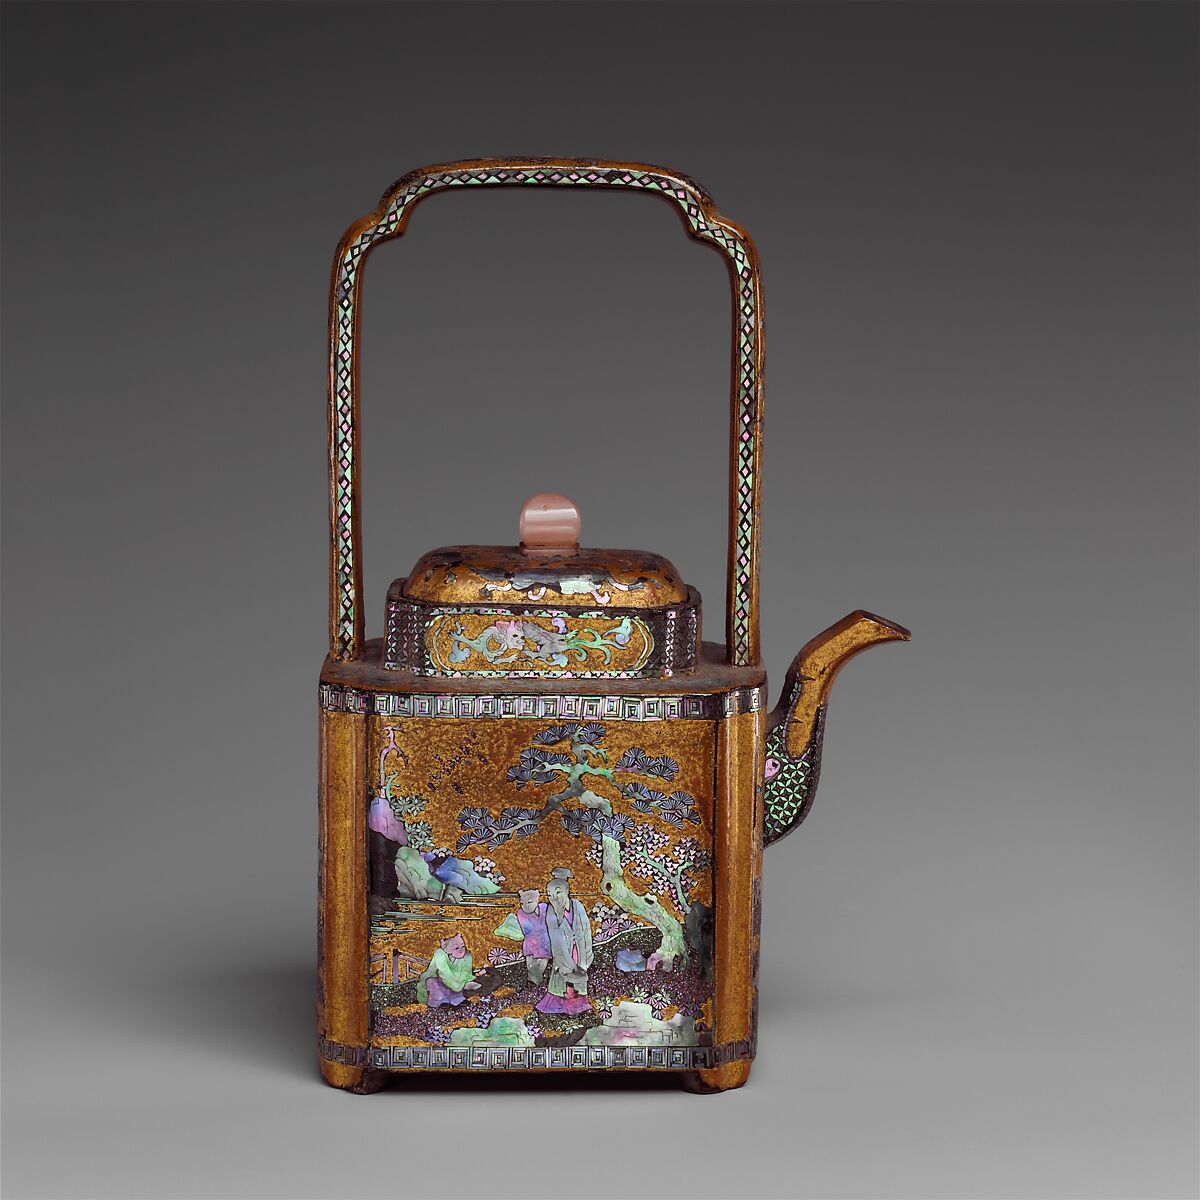 Wine pot with figures in a landscape, Gold lacquer over pewter, inlaid with mother-of-pearl, China 